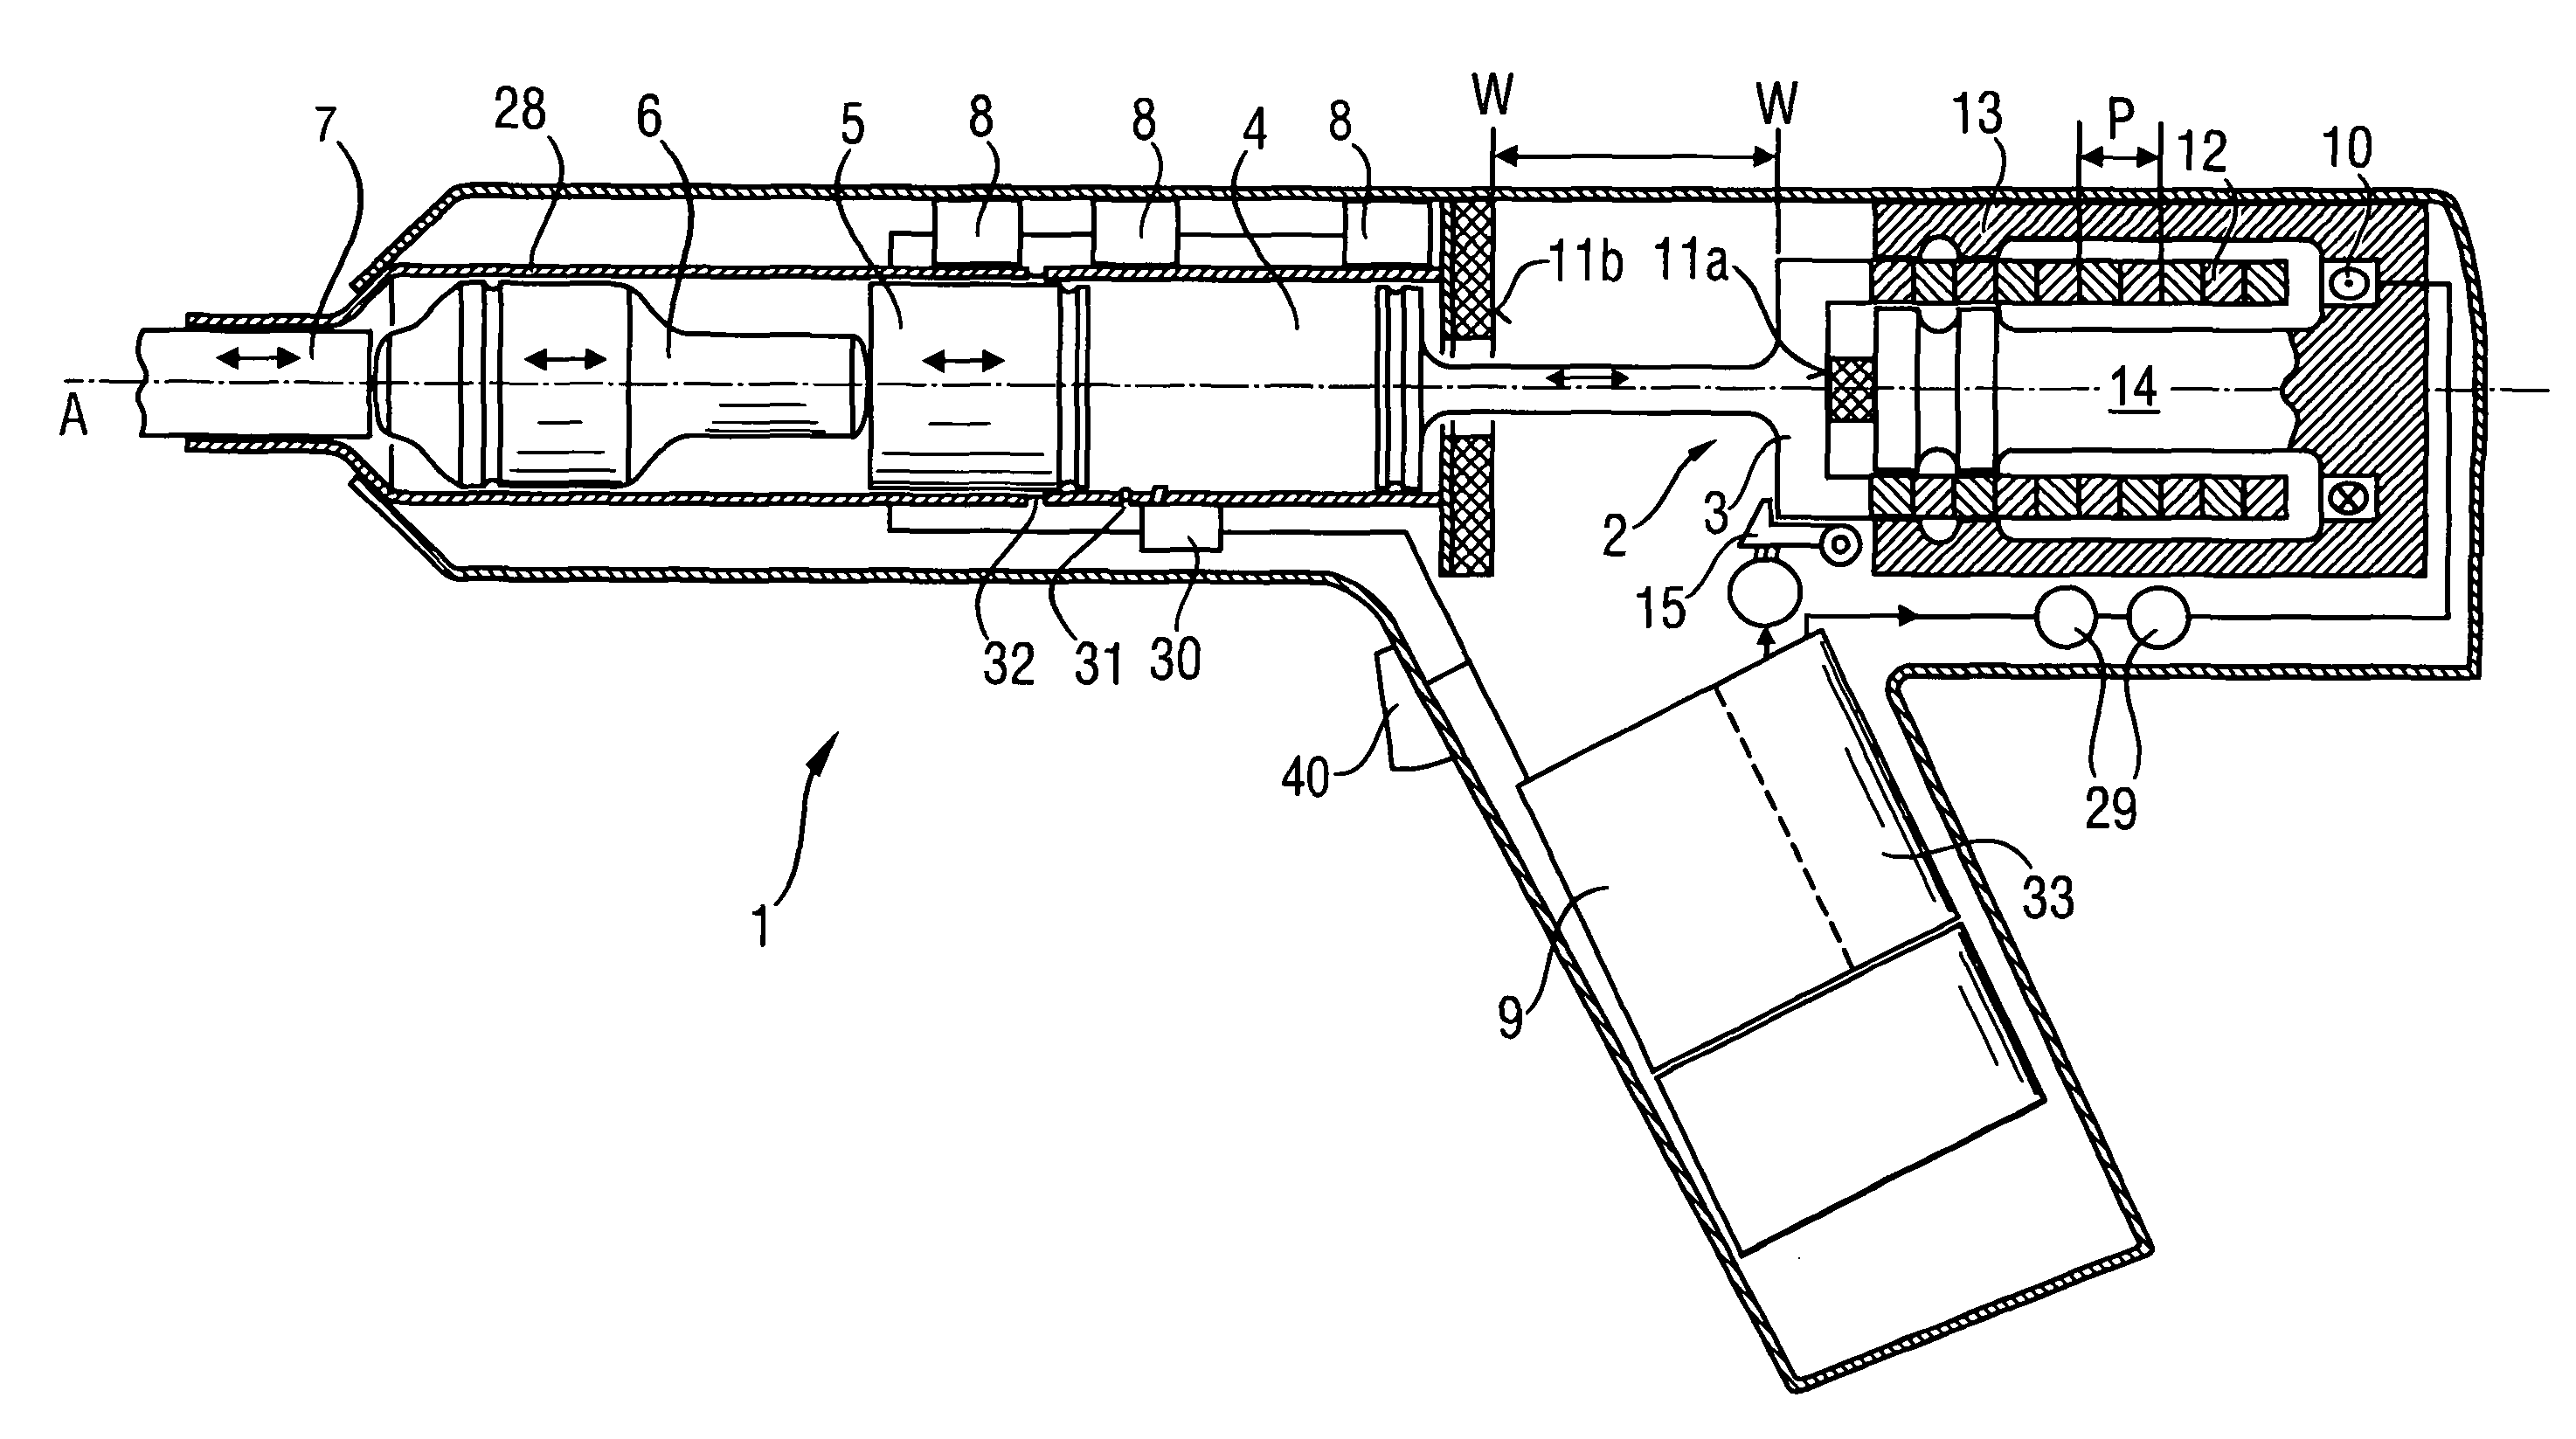 Hand-held power tool with air spring percussion mechanism, linear motor, and control process